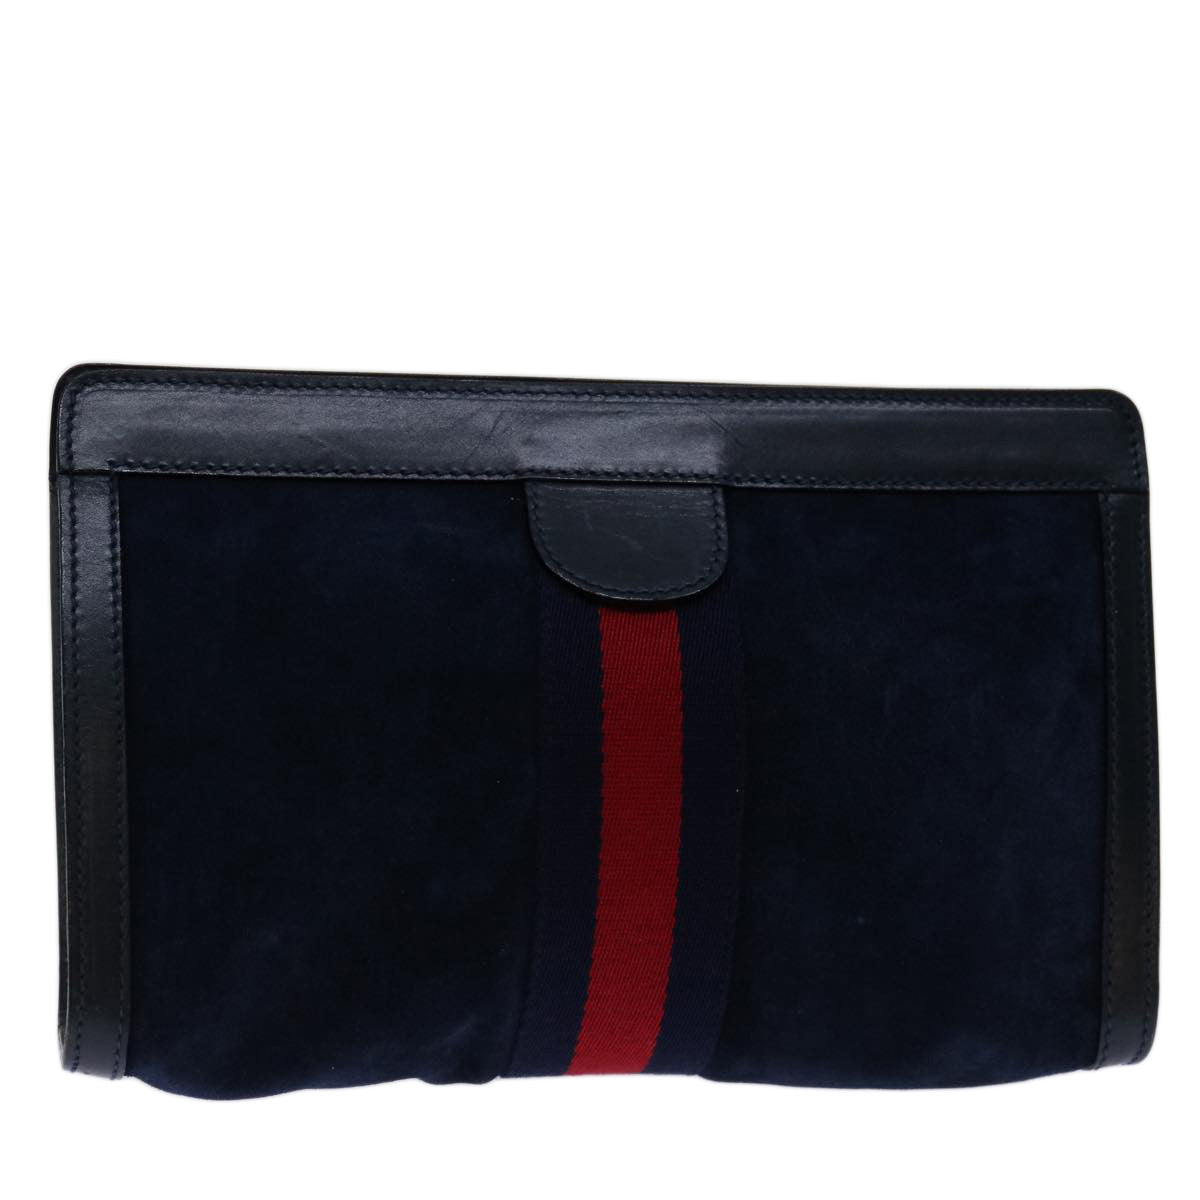 GUCCI Sherry Line Clutch Bag Suede Navy Red Auth th4726